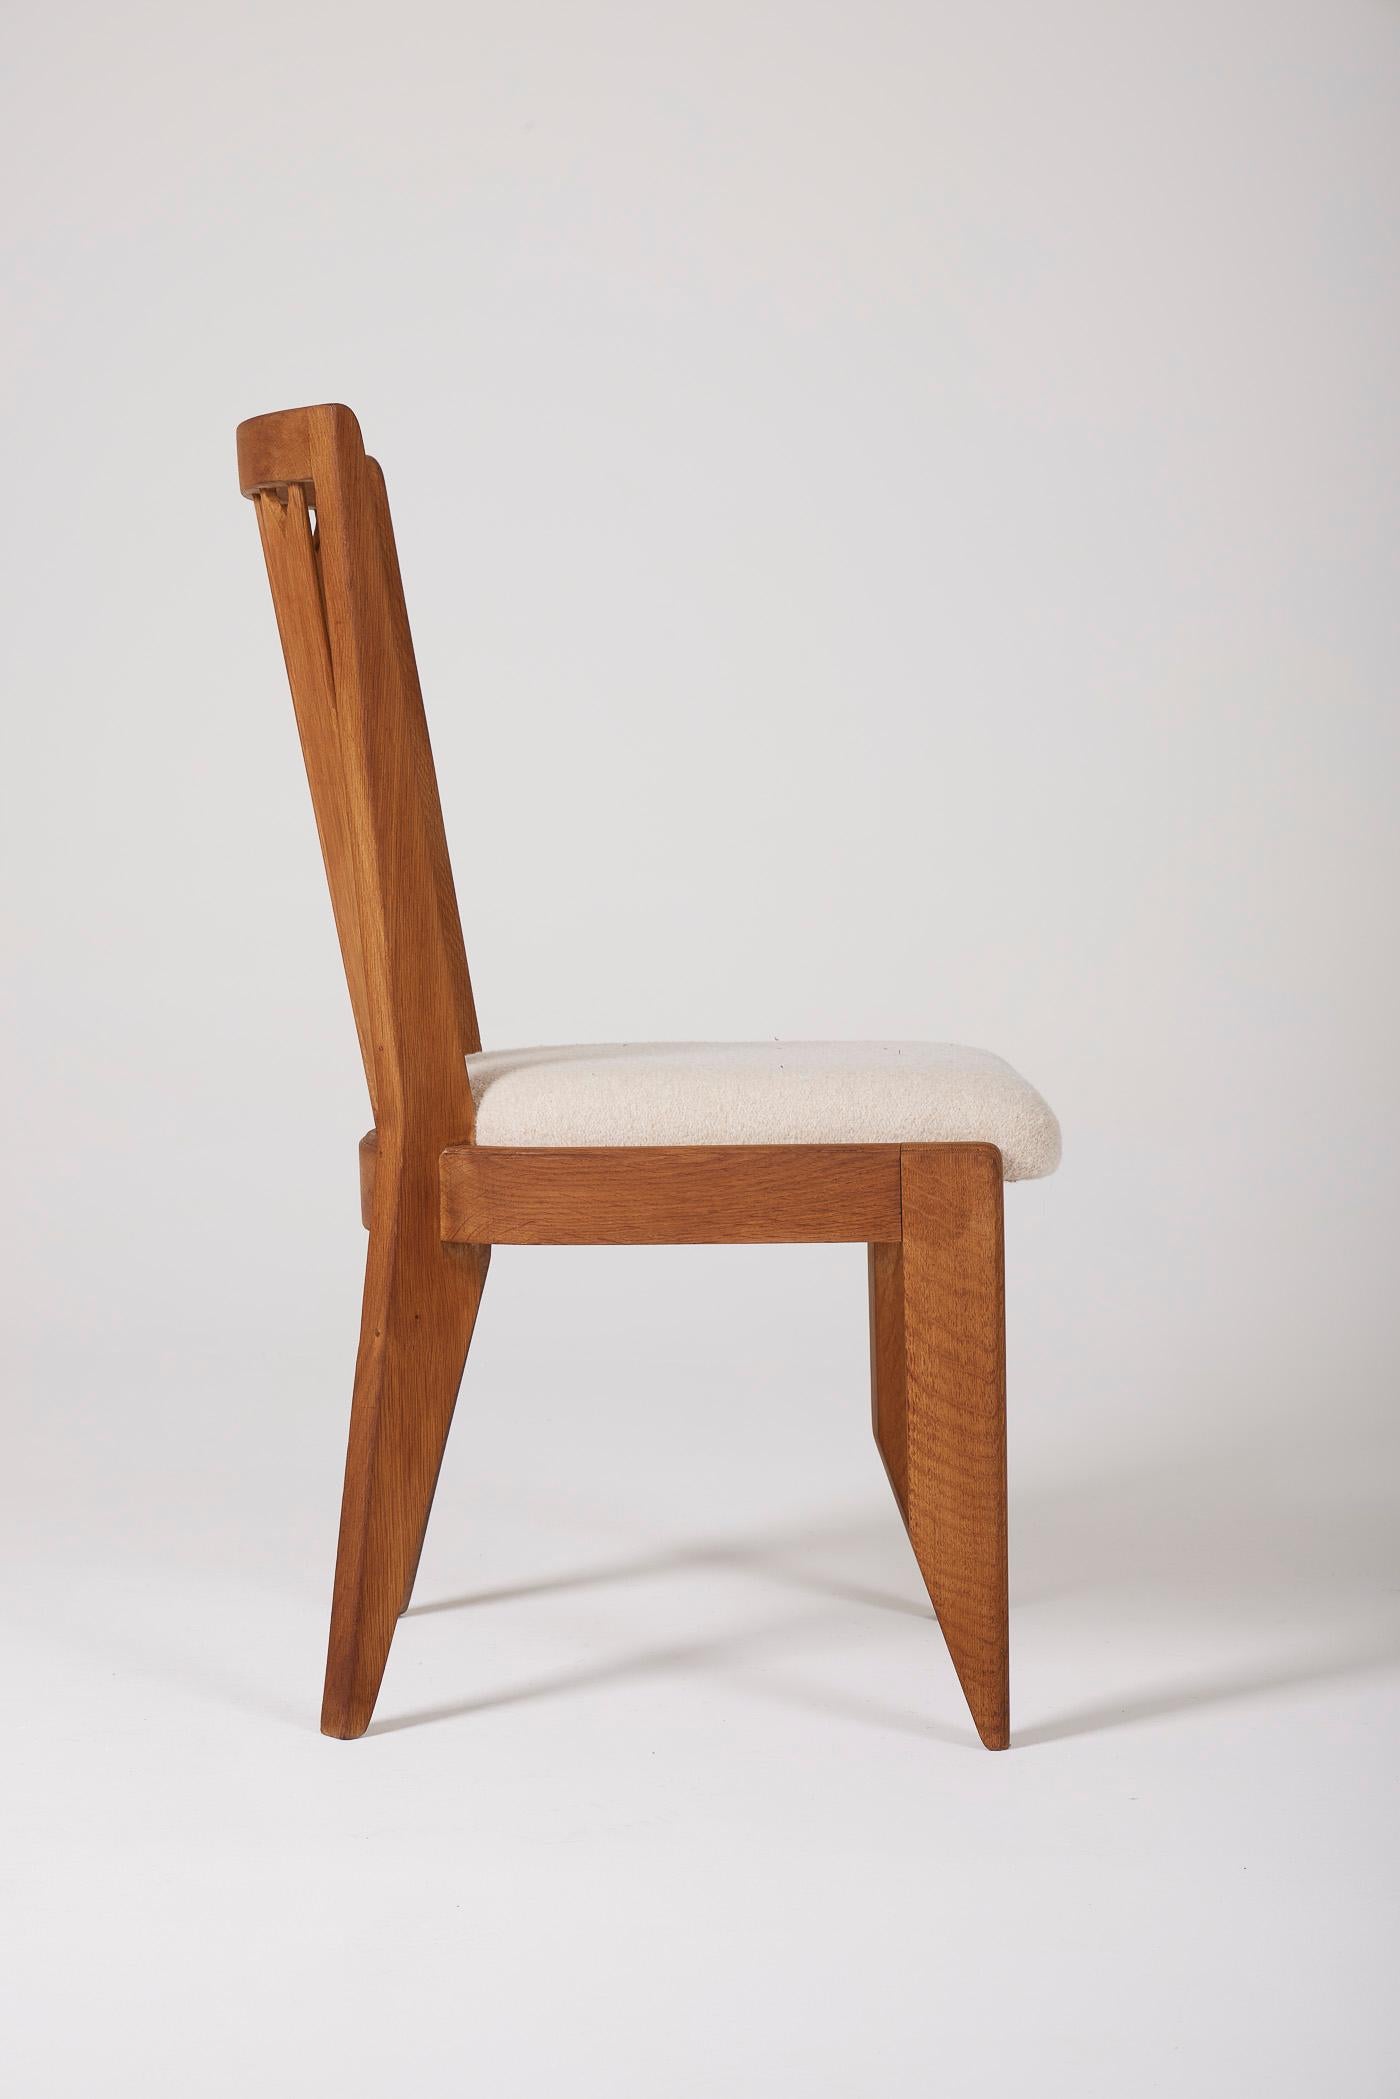 Wood Guillerme & Chambron chair For Sale